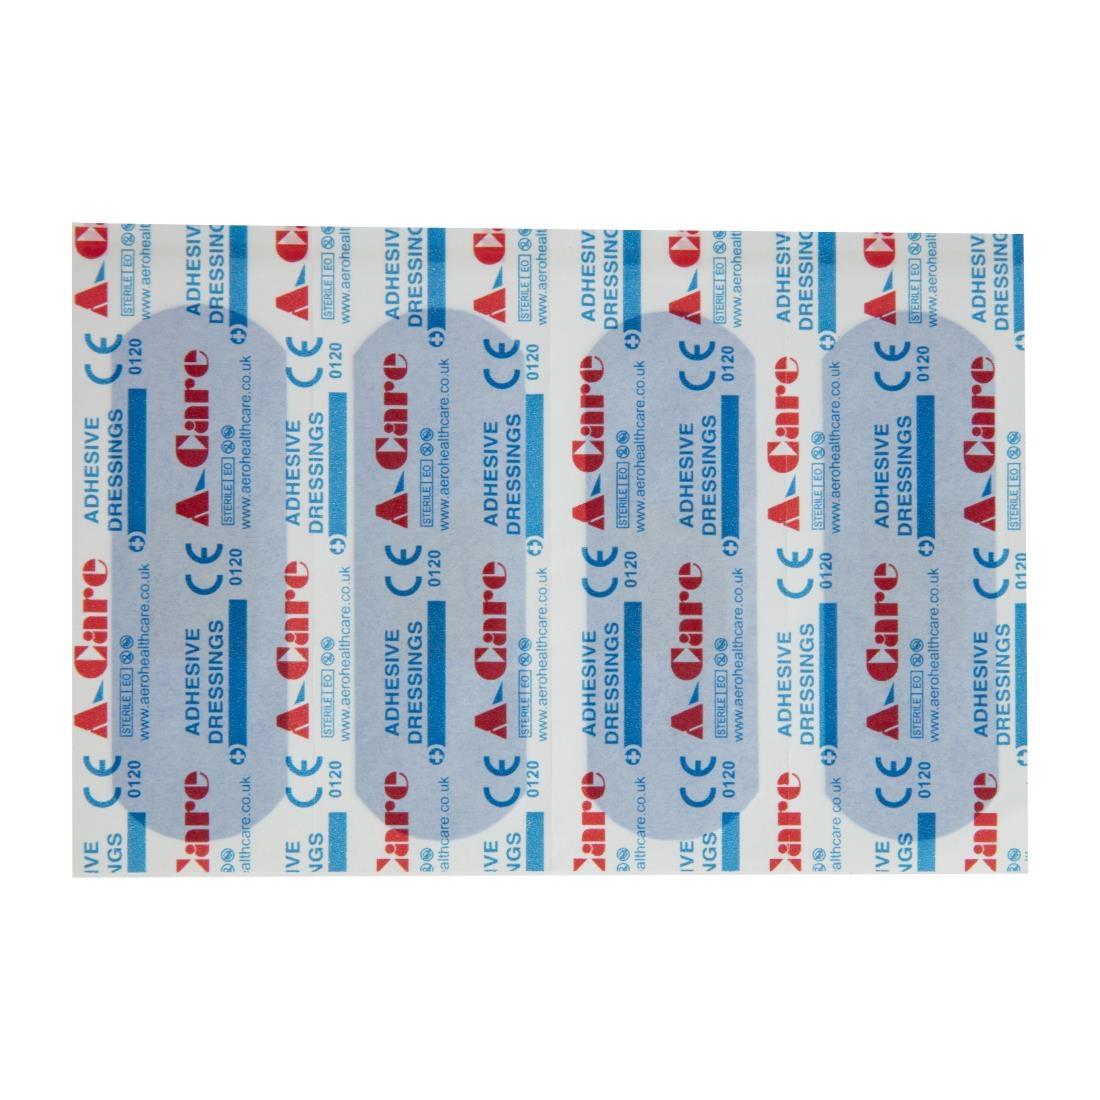 A-CARE DETECTABLE BLUE PLASTERS EXTRA WIDE STRIP 75X25MM - BOX 100 - CB442  - 4